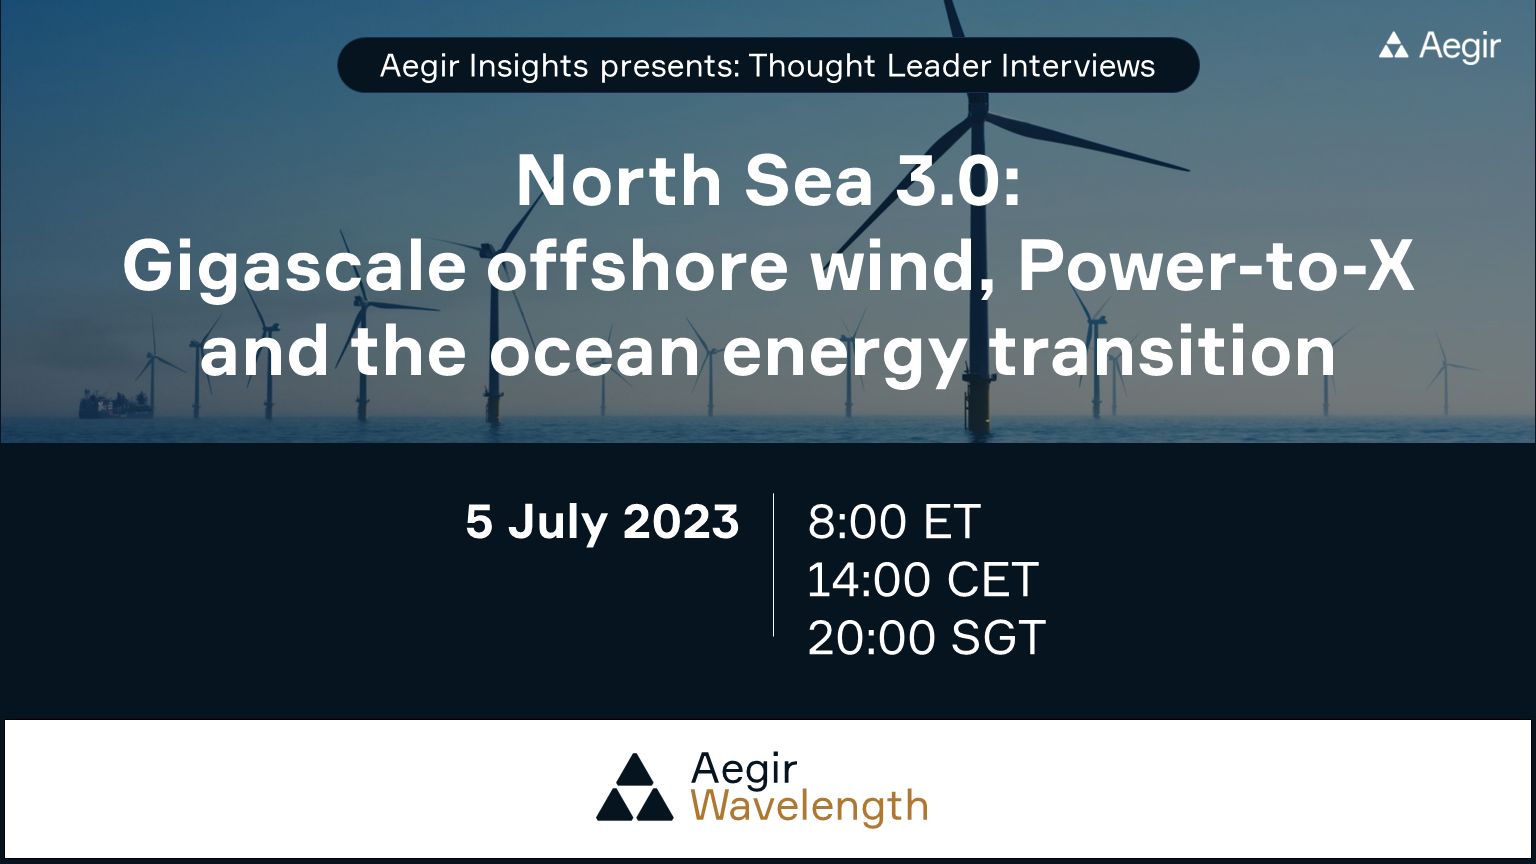 Ad for the first Aegir Wavelength, Aegir Insights' new digital interview series, talking about North Sea 3.0: Gigascale offshore wind, Power-to-X and the ocean energy transition. Interview with Trine Borum Bojsen, SVP for renewable in Europe at Equinor